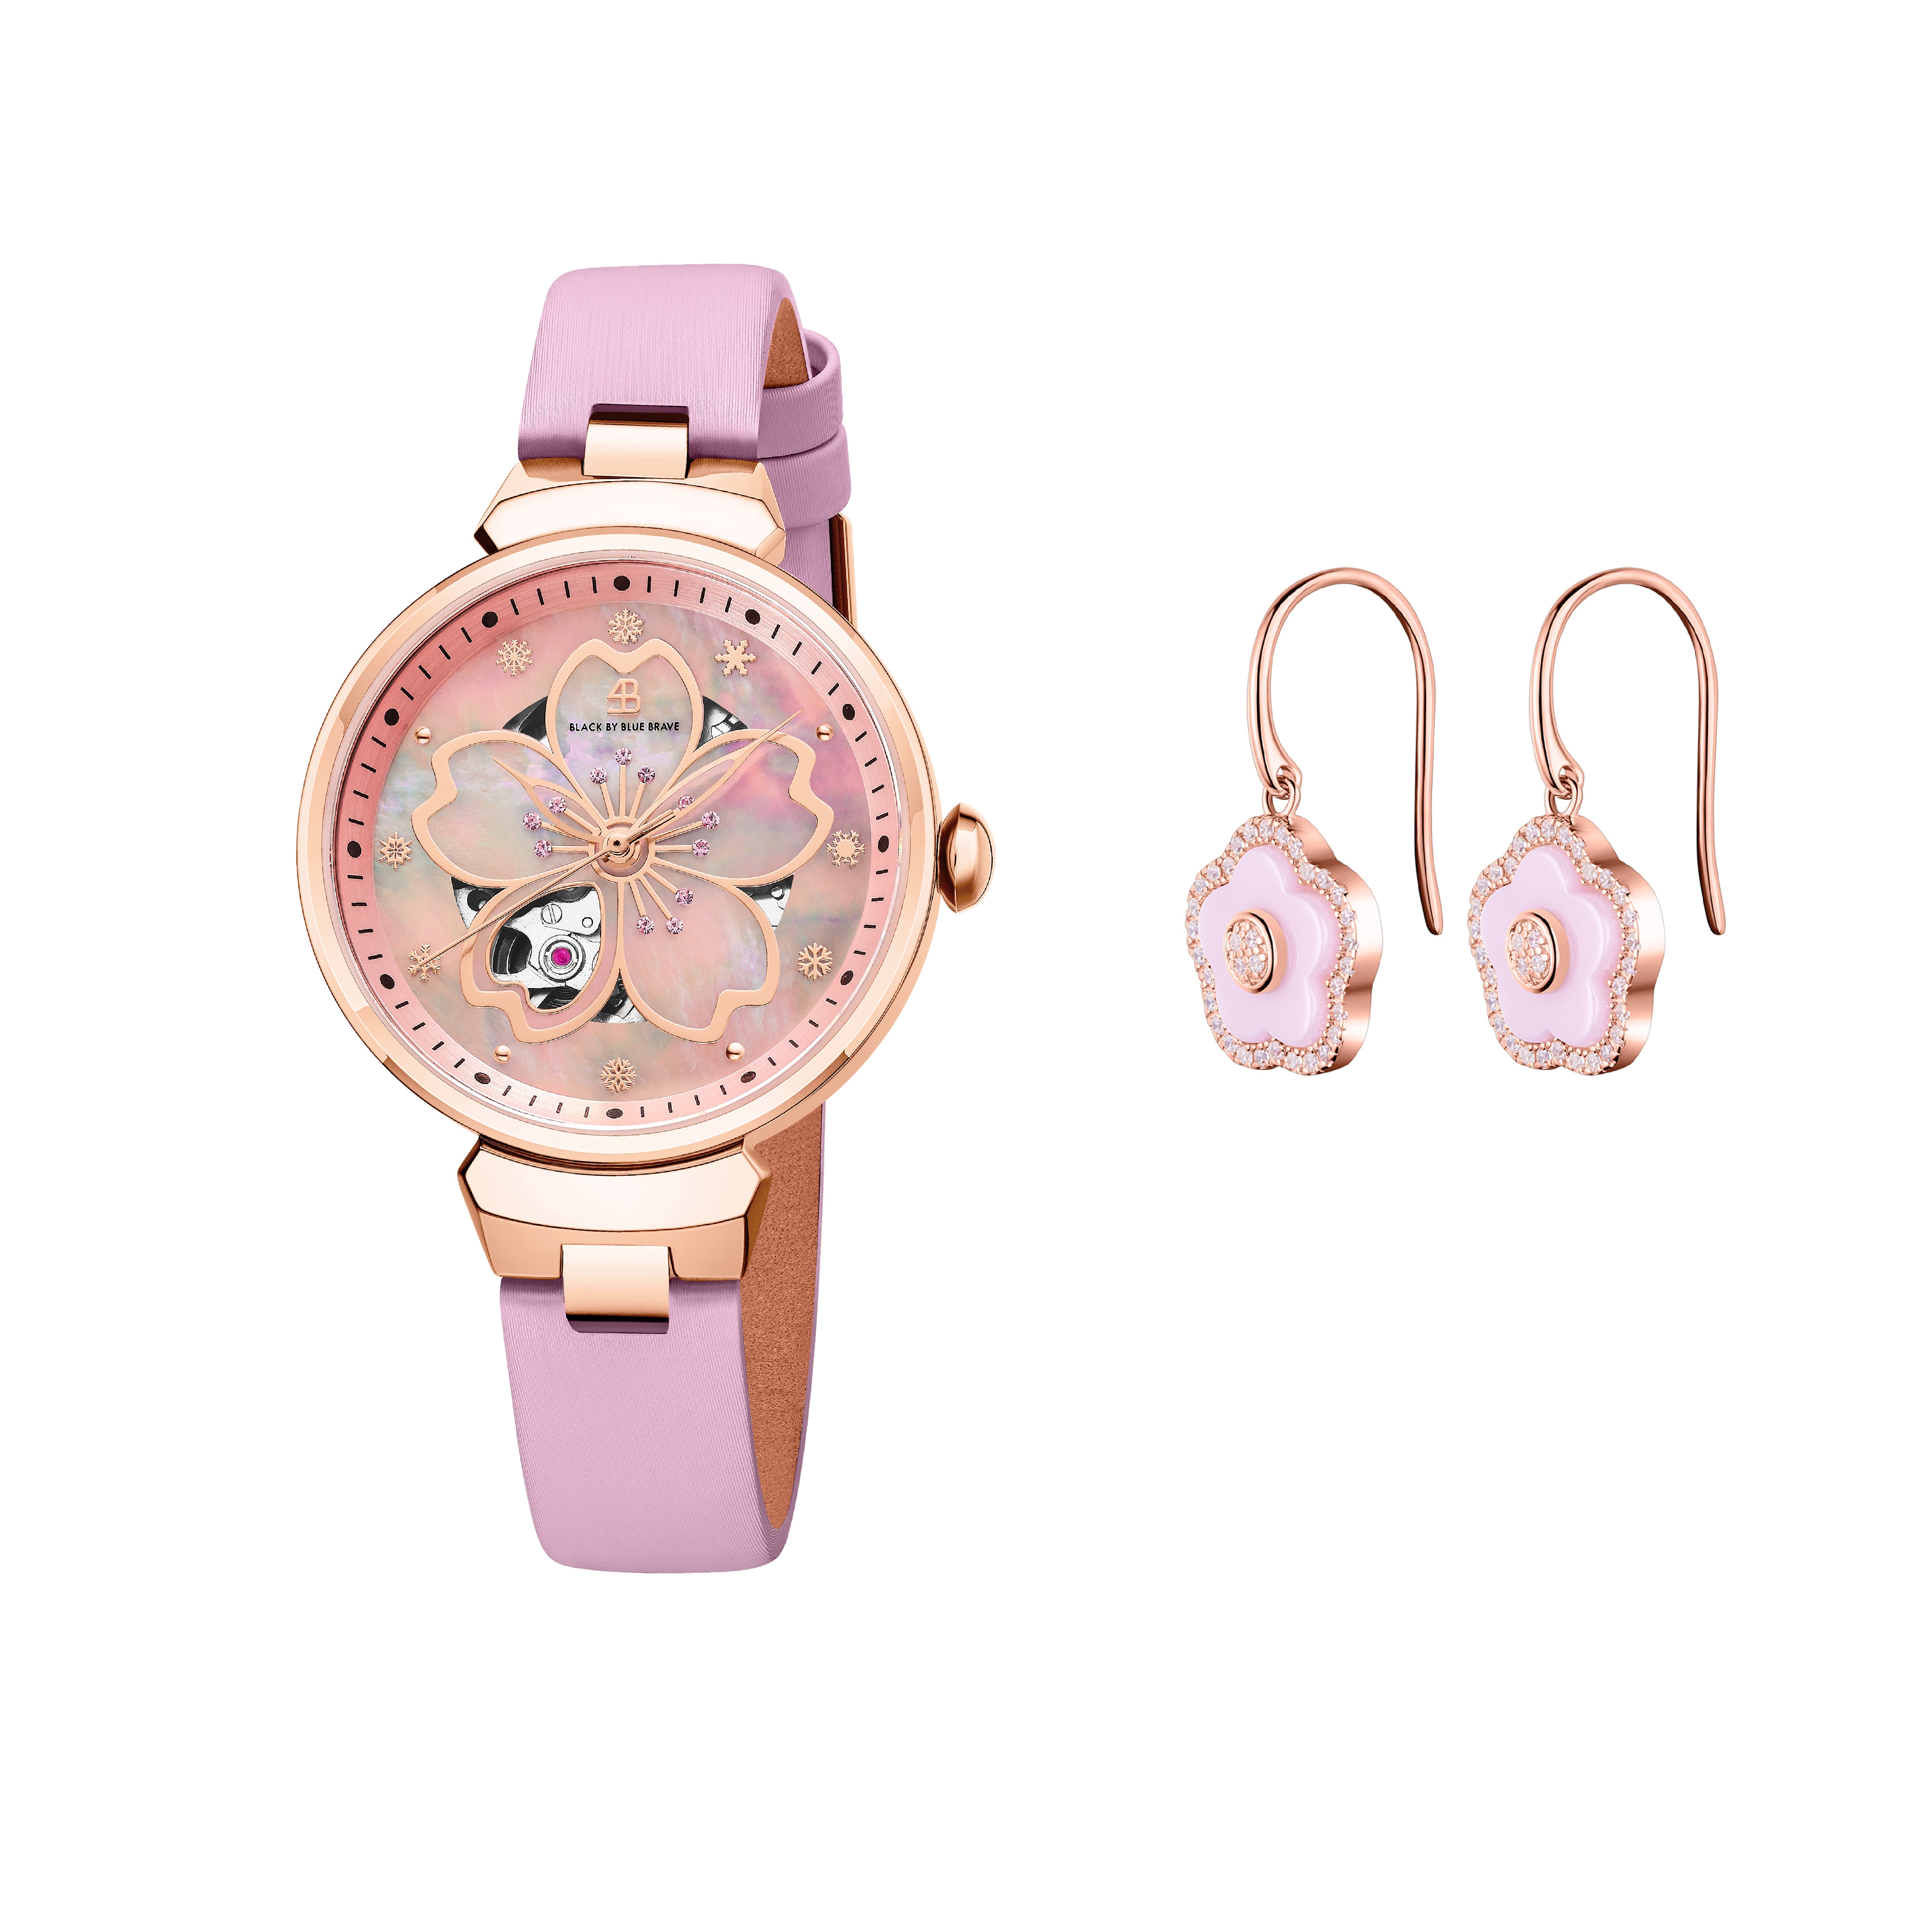 Pink Cherry Blossom 36mm Automatic Watch & Rosegold Flower Earrings & Pink Ceramic Ceramic